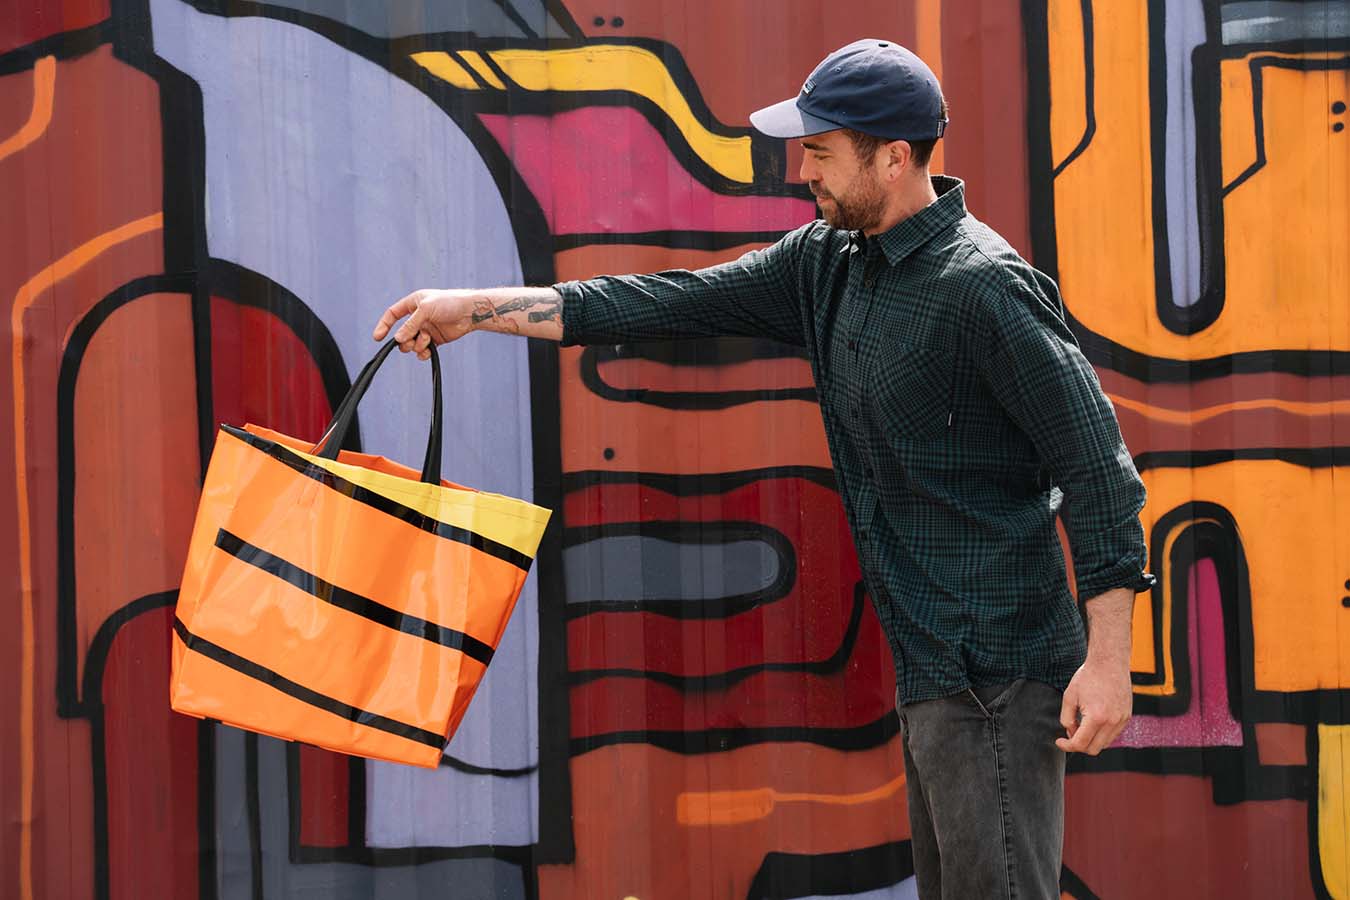 A man in a baseball cap holds up an orange and black bag. He is standing in front of a colourful artwork.